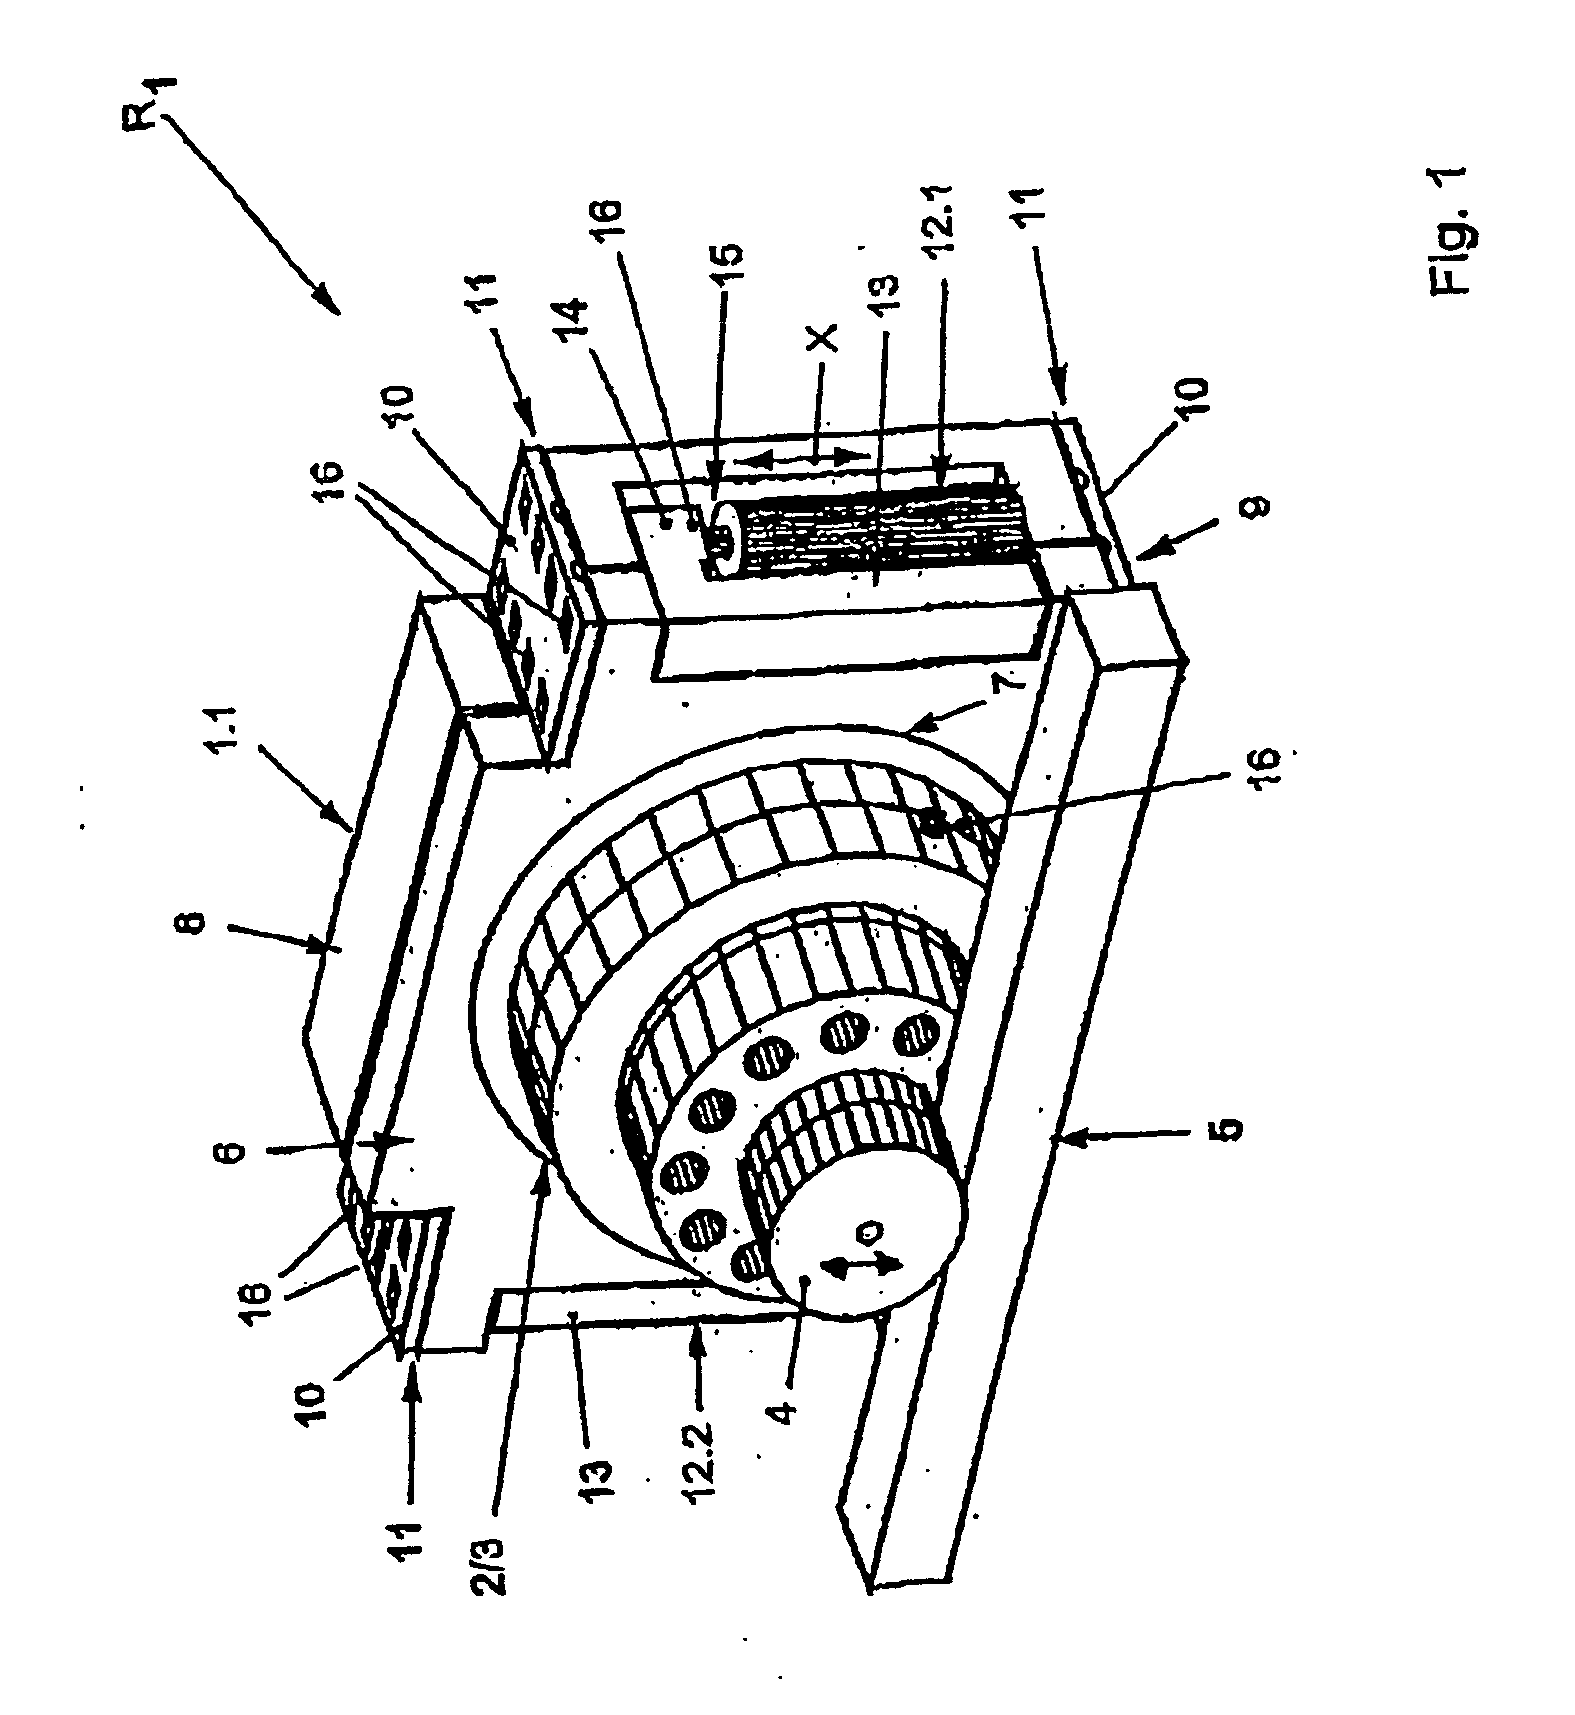 Linear drive, in particular a rack and pinion drive